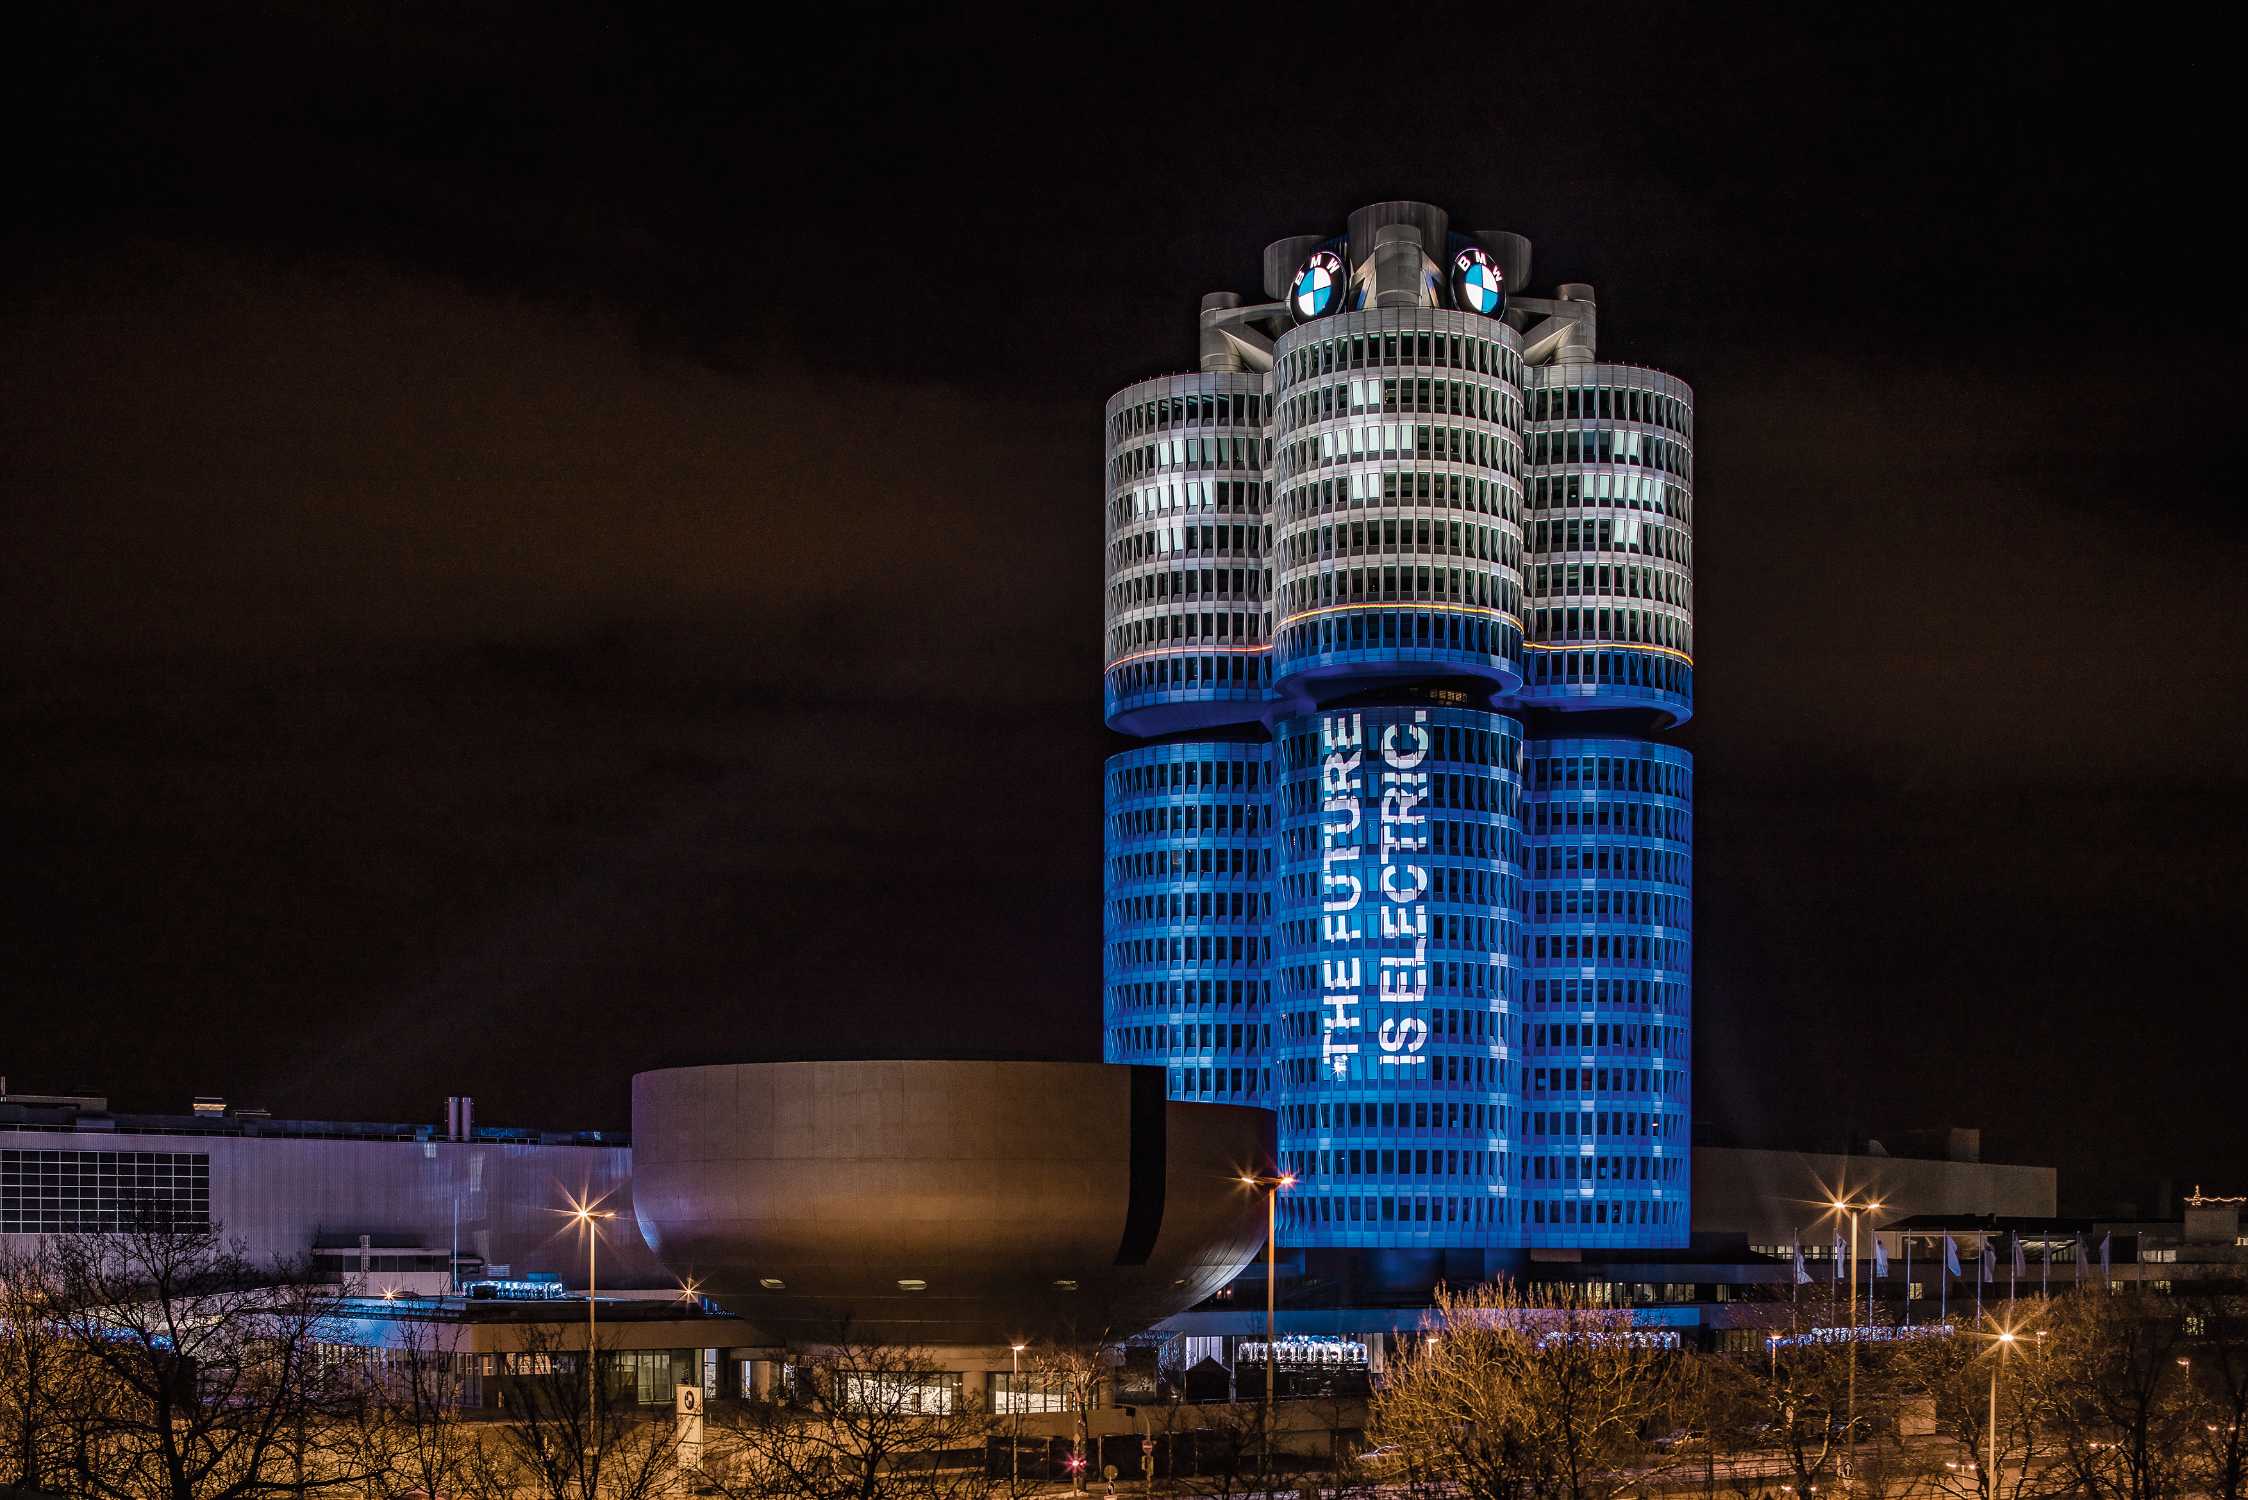 The BMW Group has delivered more than 100,000 electrified vehicles to customers worldwide in 2017, as promised at the beginning of the year. An eye-catching light installation transformed the BMW Group headquarters, the world-famous “Four-Cylinder” in the north of Munich, on the evening of 18 December 2017 into a battery. (Ralph Larmann, 12/2017)